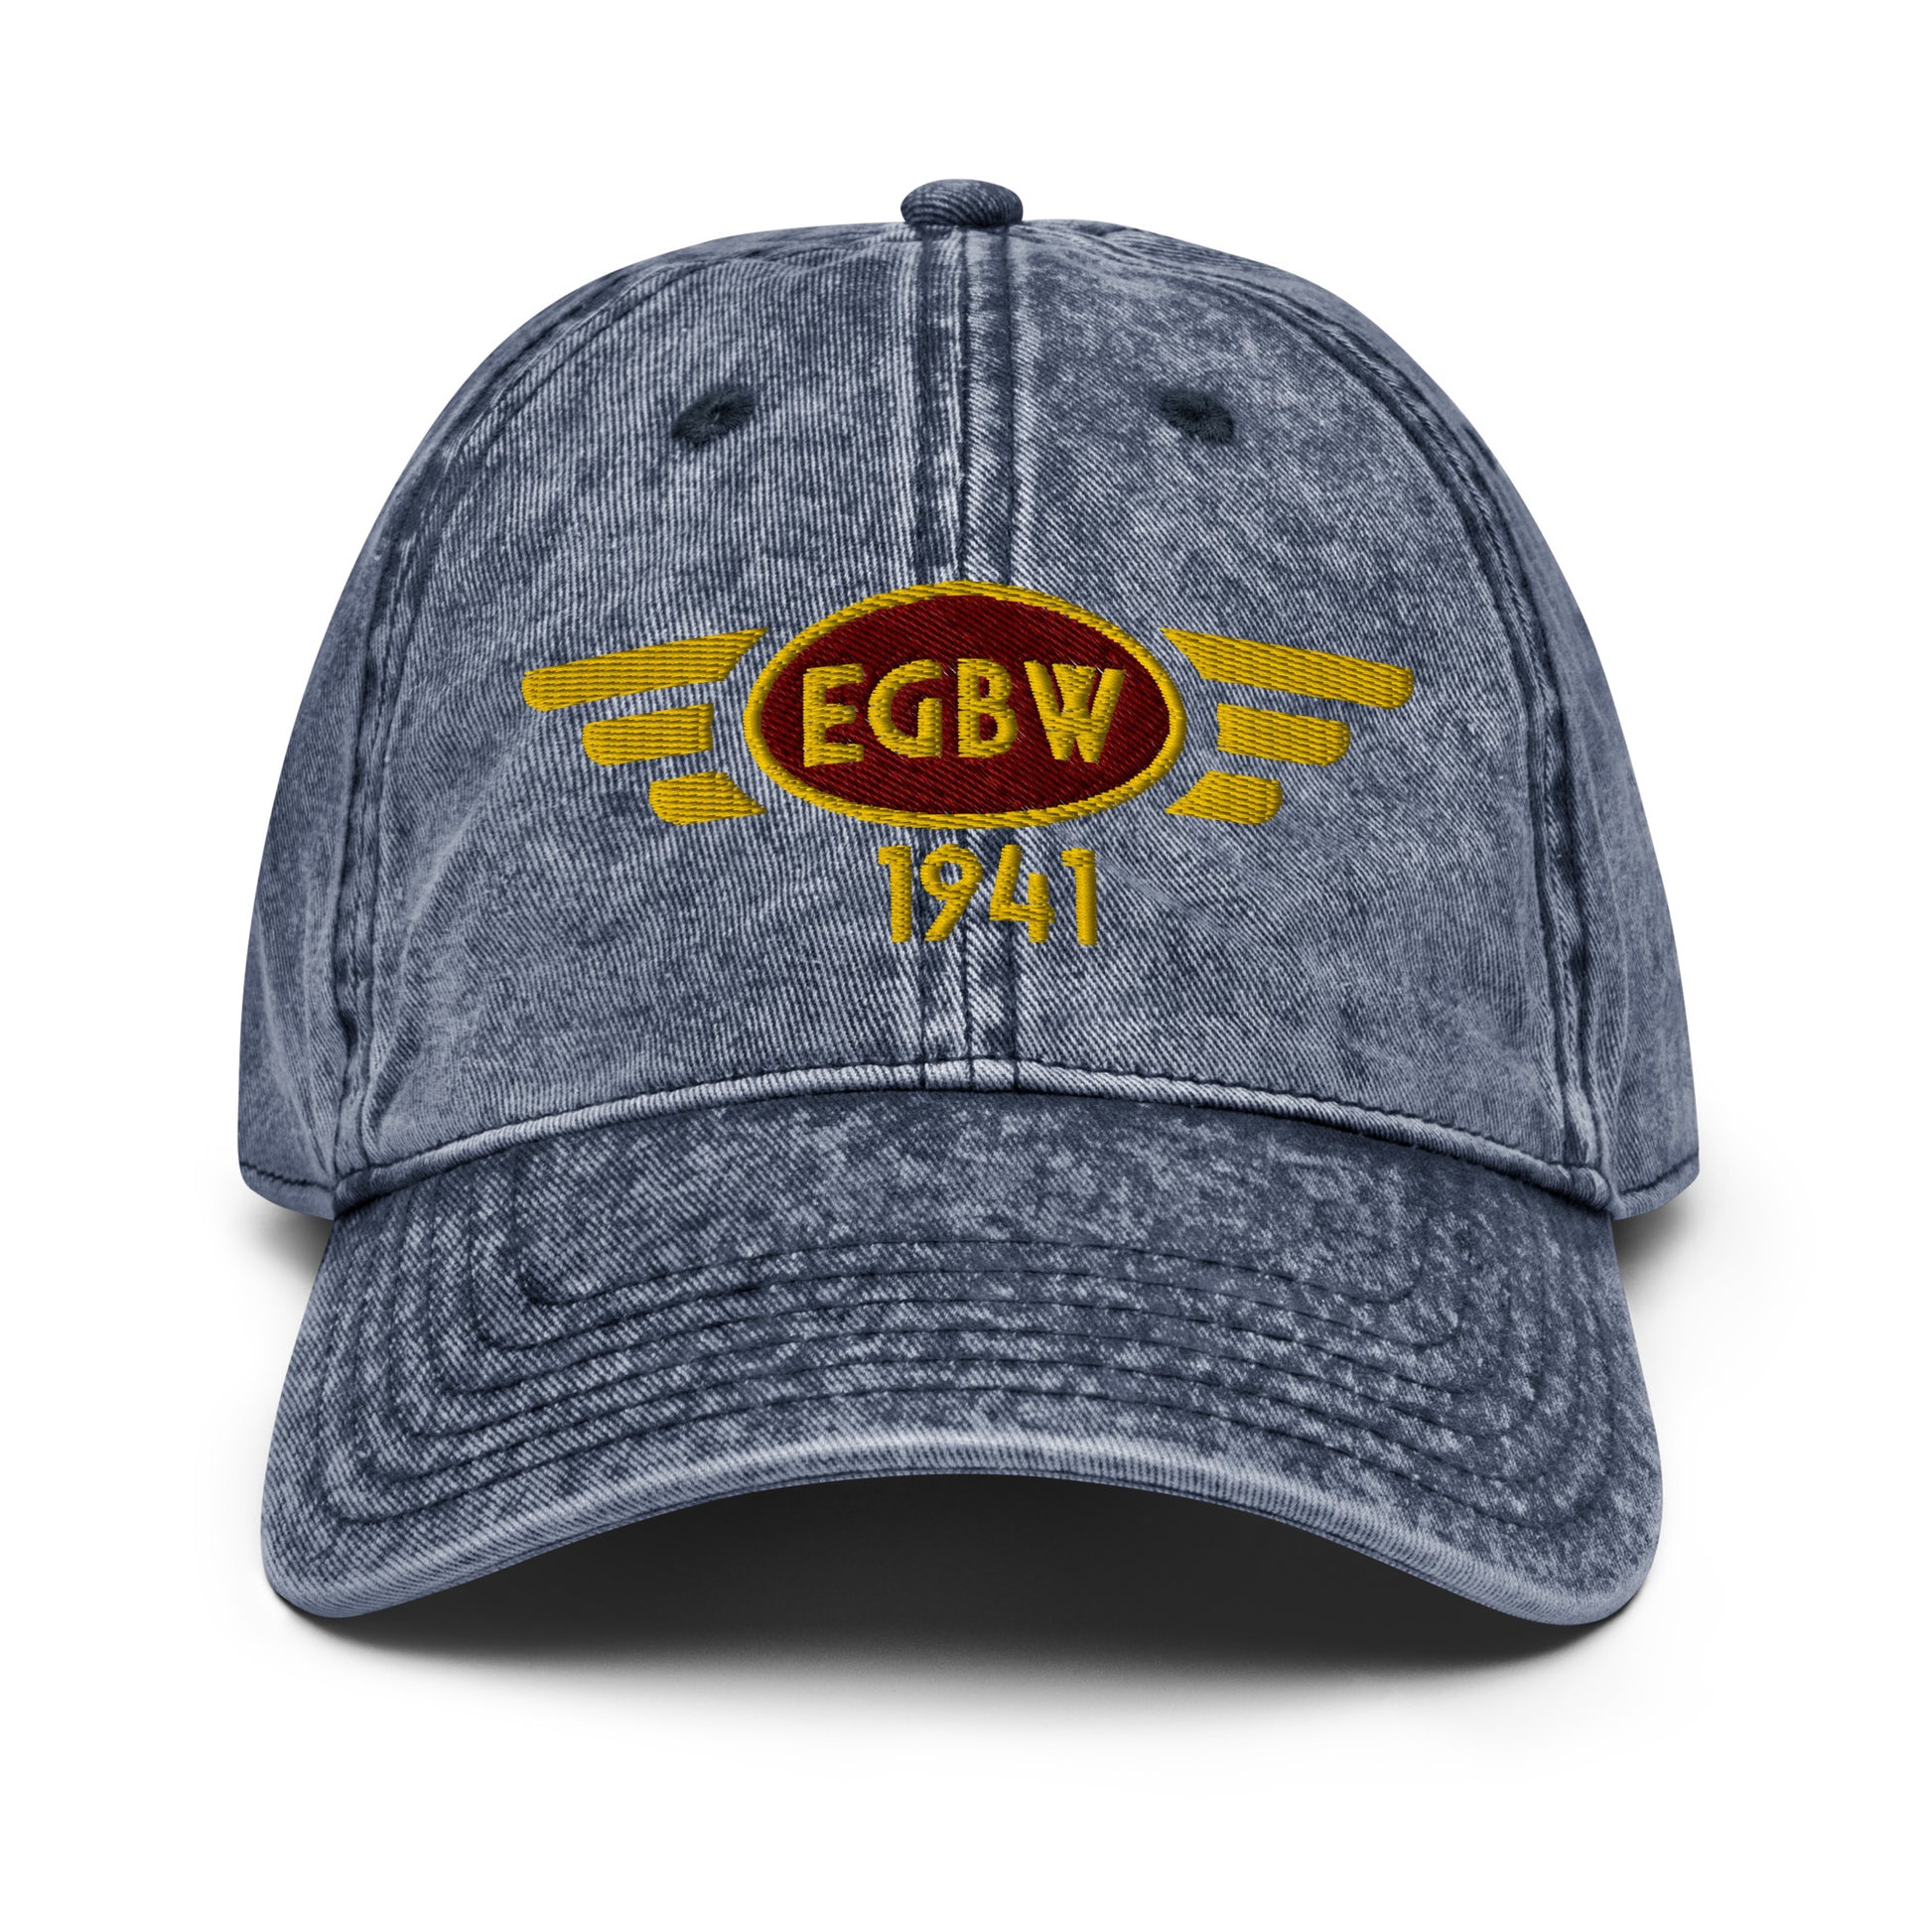 Blue cotton twill baseball cap with embroidered vintage style aviation logo for Wellsbourne Airfield.